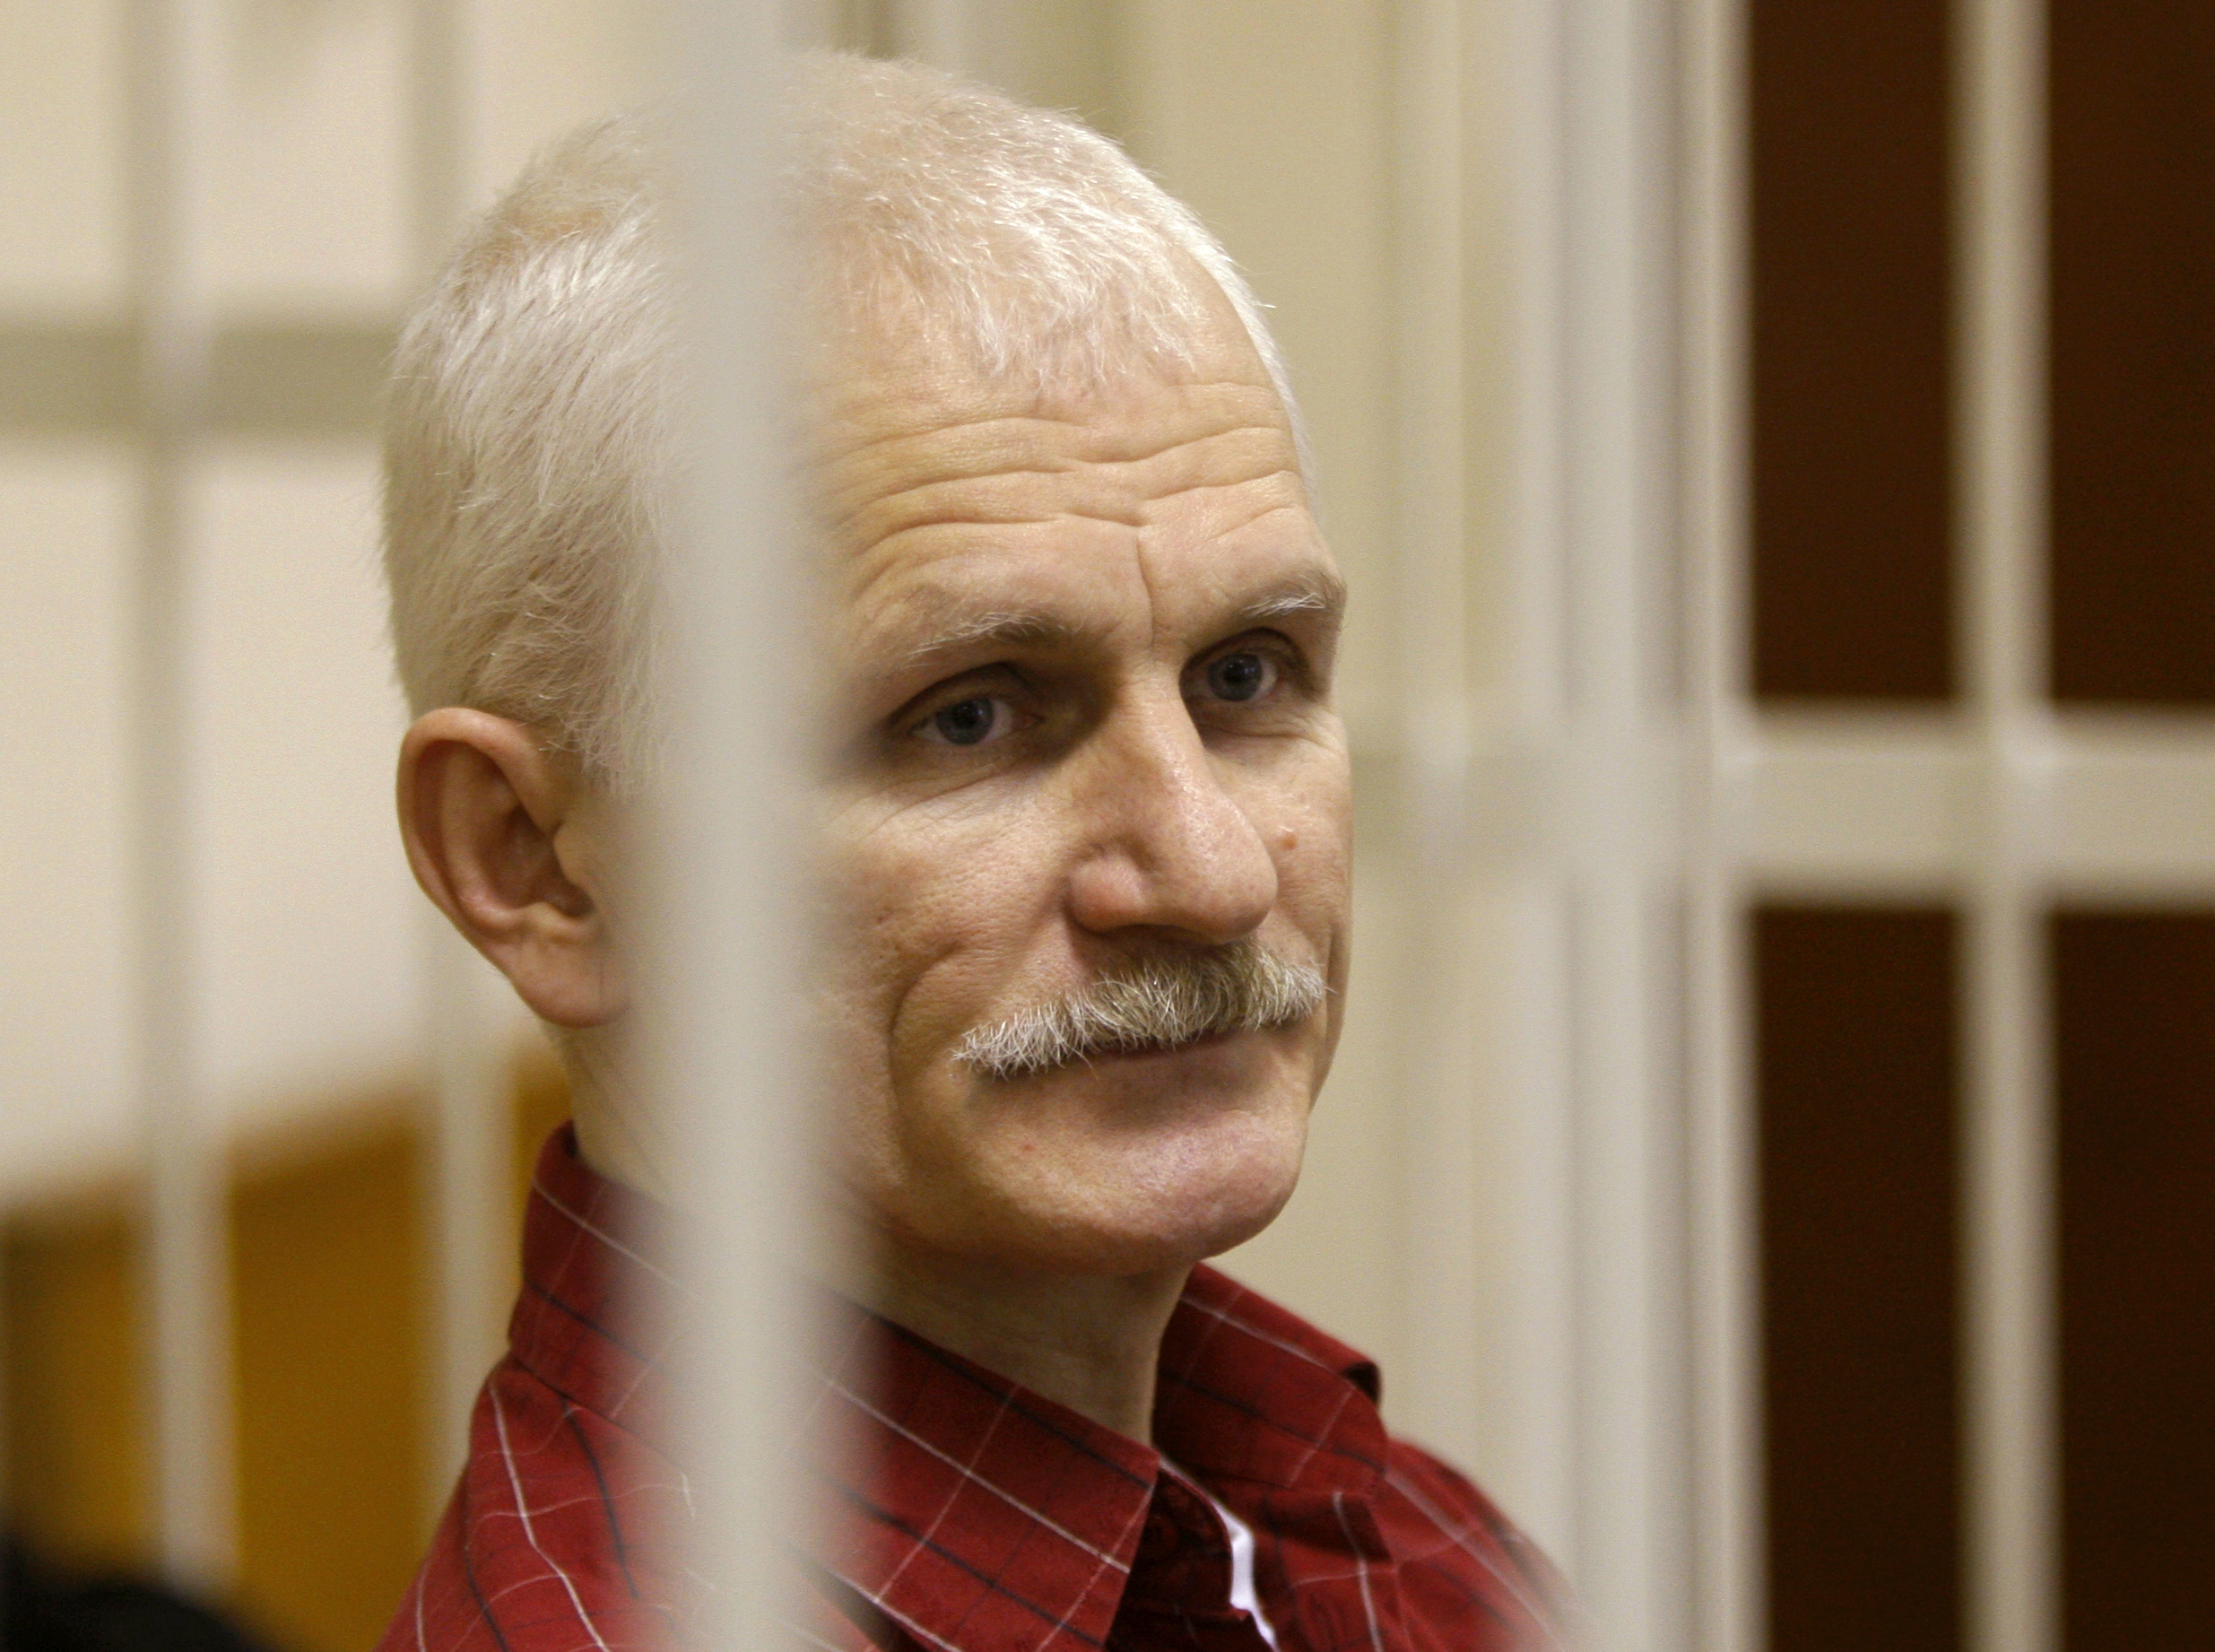 FILE - Ales Bialiatski, the head of Belarusian Vyasna rights group, stands in a defendants' cage during a court session in Minsk, Belarus, on Wednesday, Nov. 2, 2011. On Friday, Oct. 7, 2022 the Nobel Peace Prize was awarded to jailed Belarus rights activist Ales Bialiatski, the Russian group Memorial and the Ukrainian organization Center for Civil Liberties. (AP Photo/Sergei Grits, File)